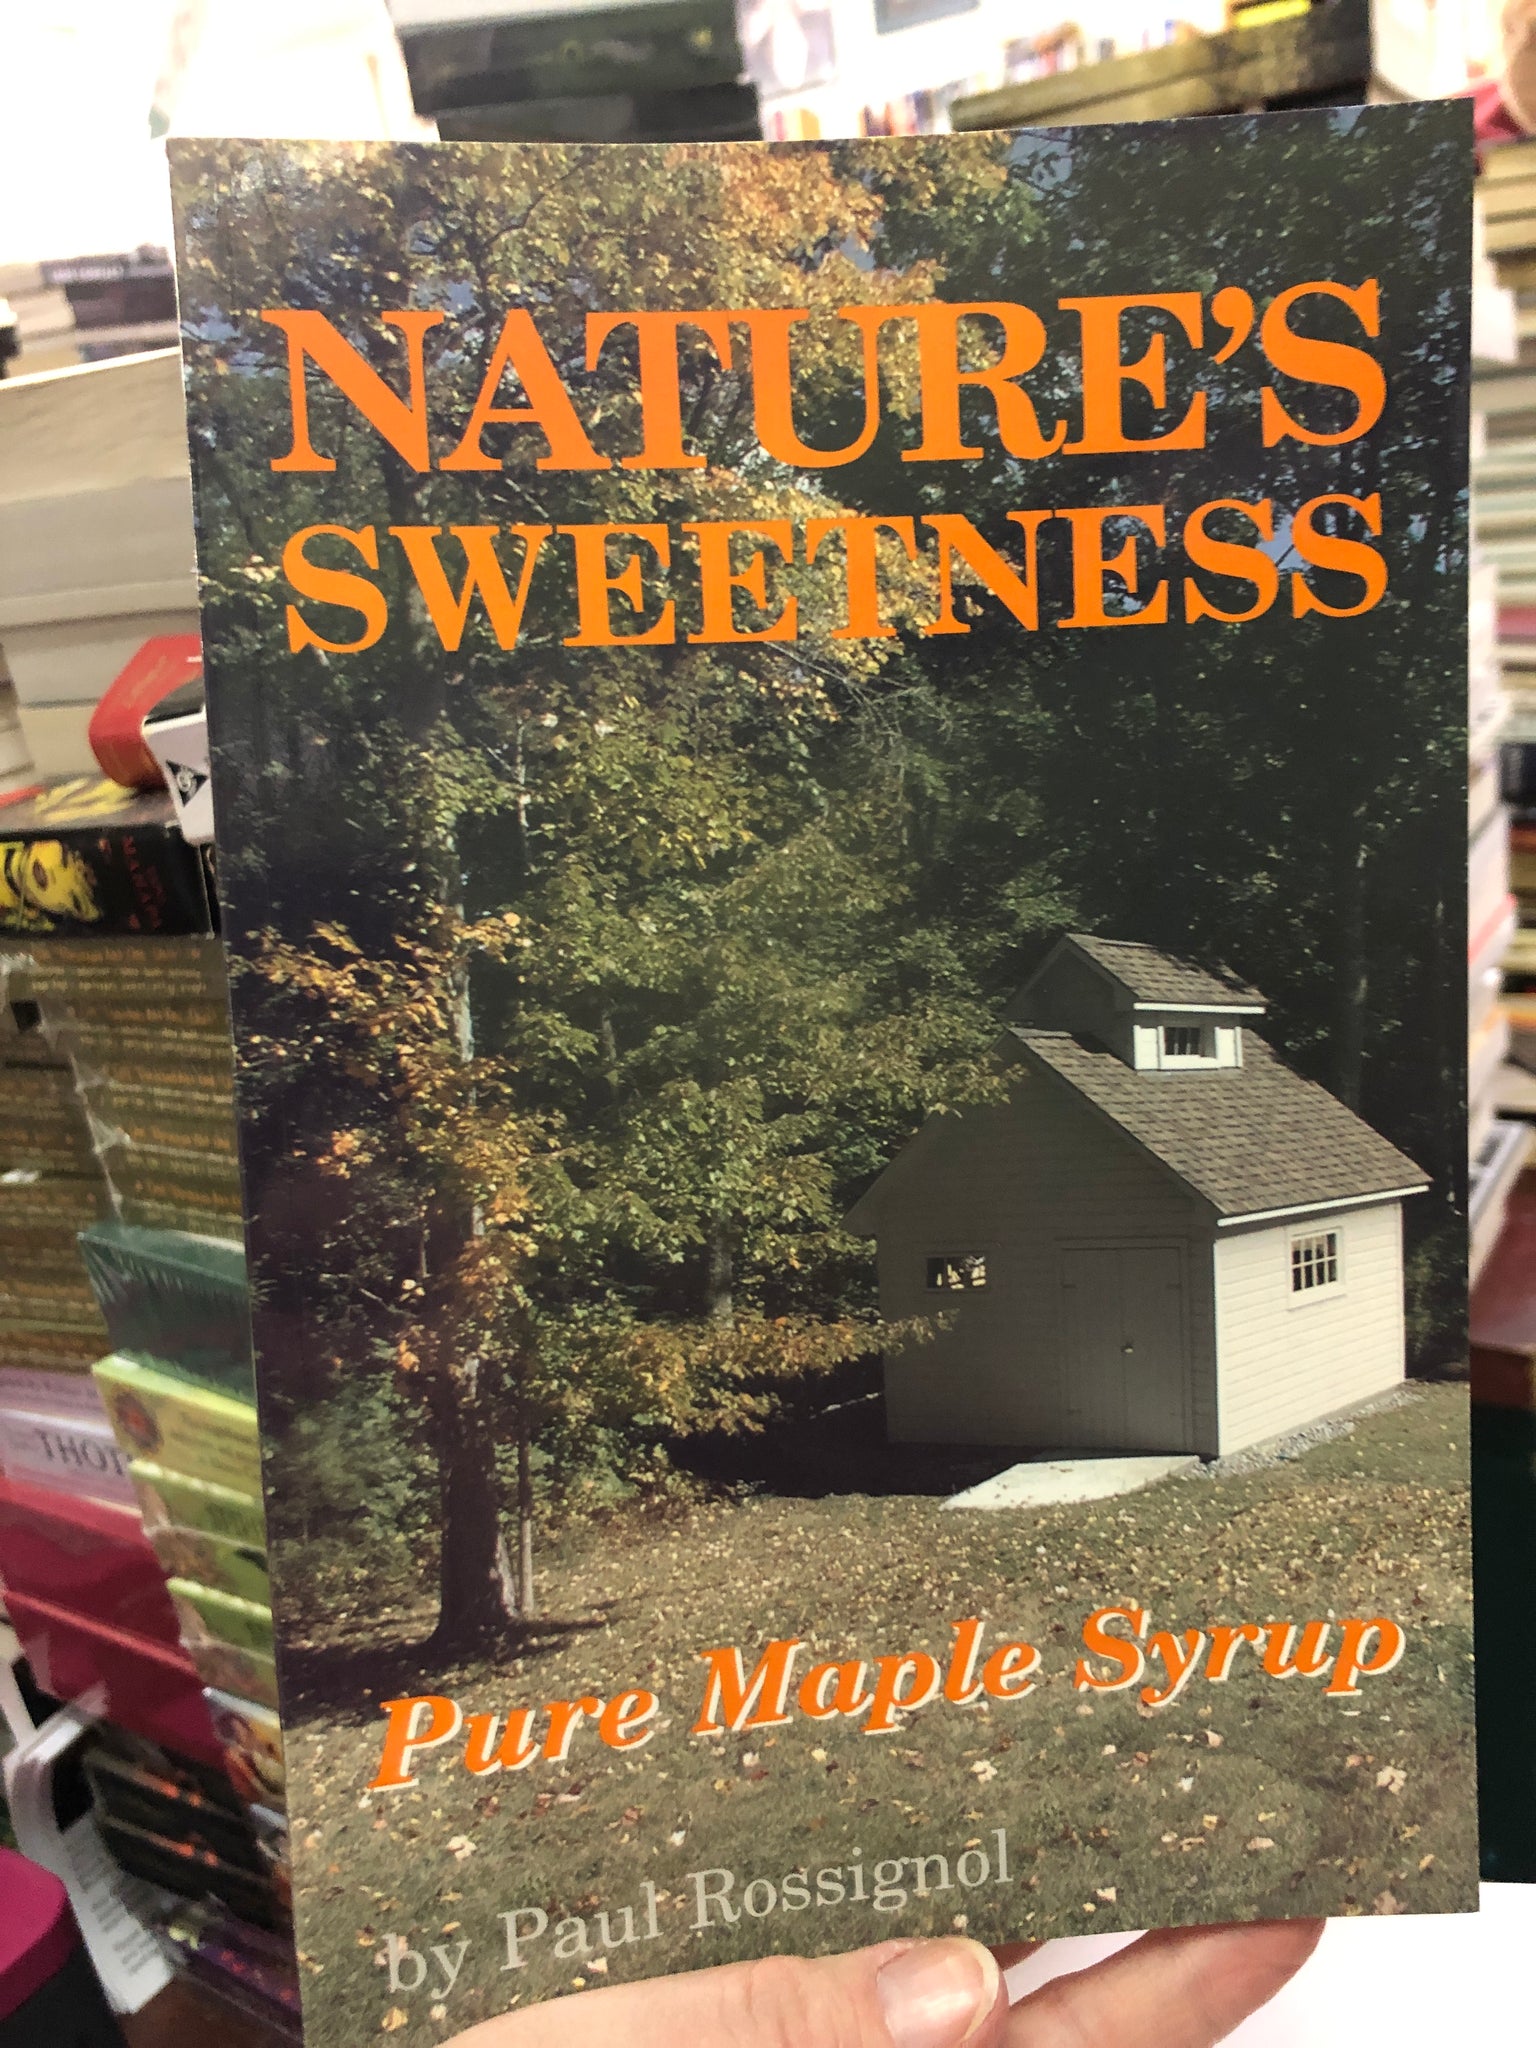 Nature's Sweetness: How to Make Pure Maple Syrup by Paul Rossignol - SIGNED!